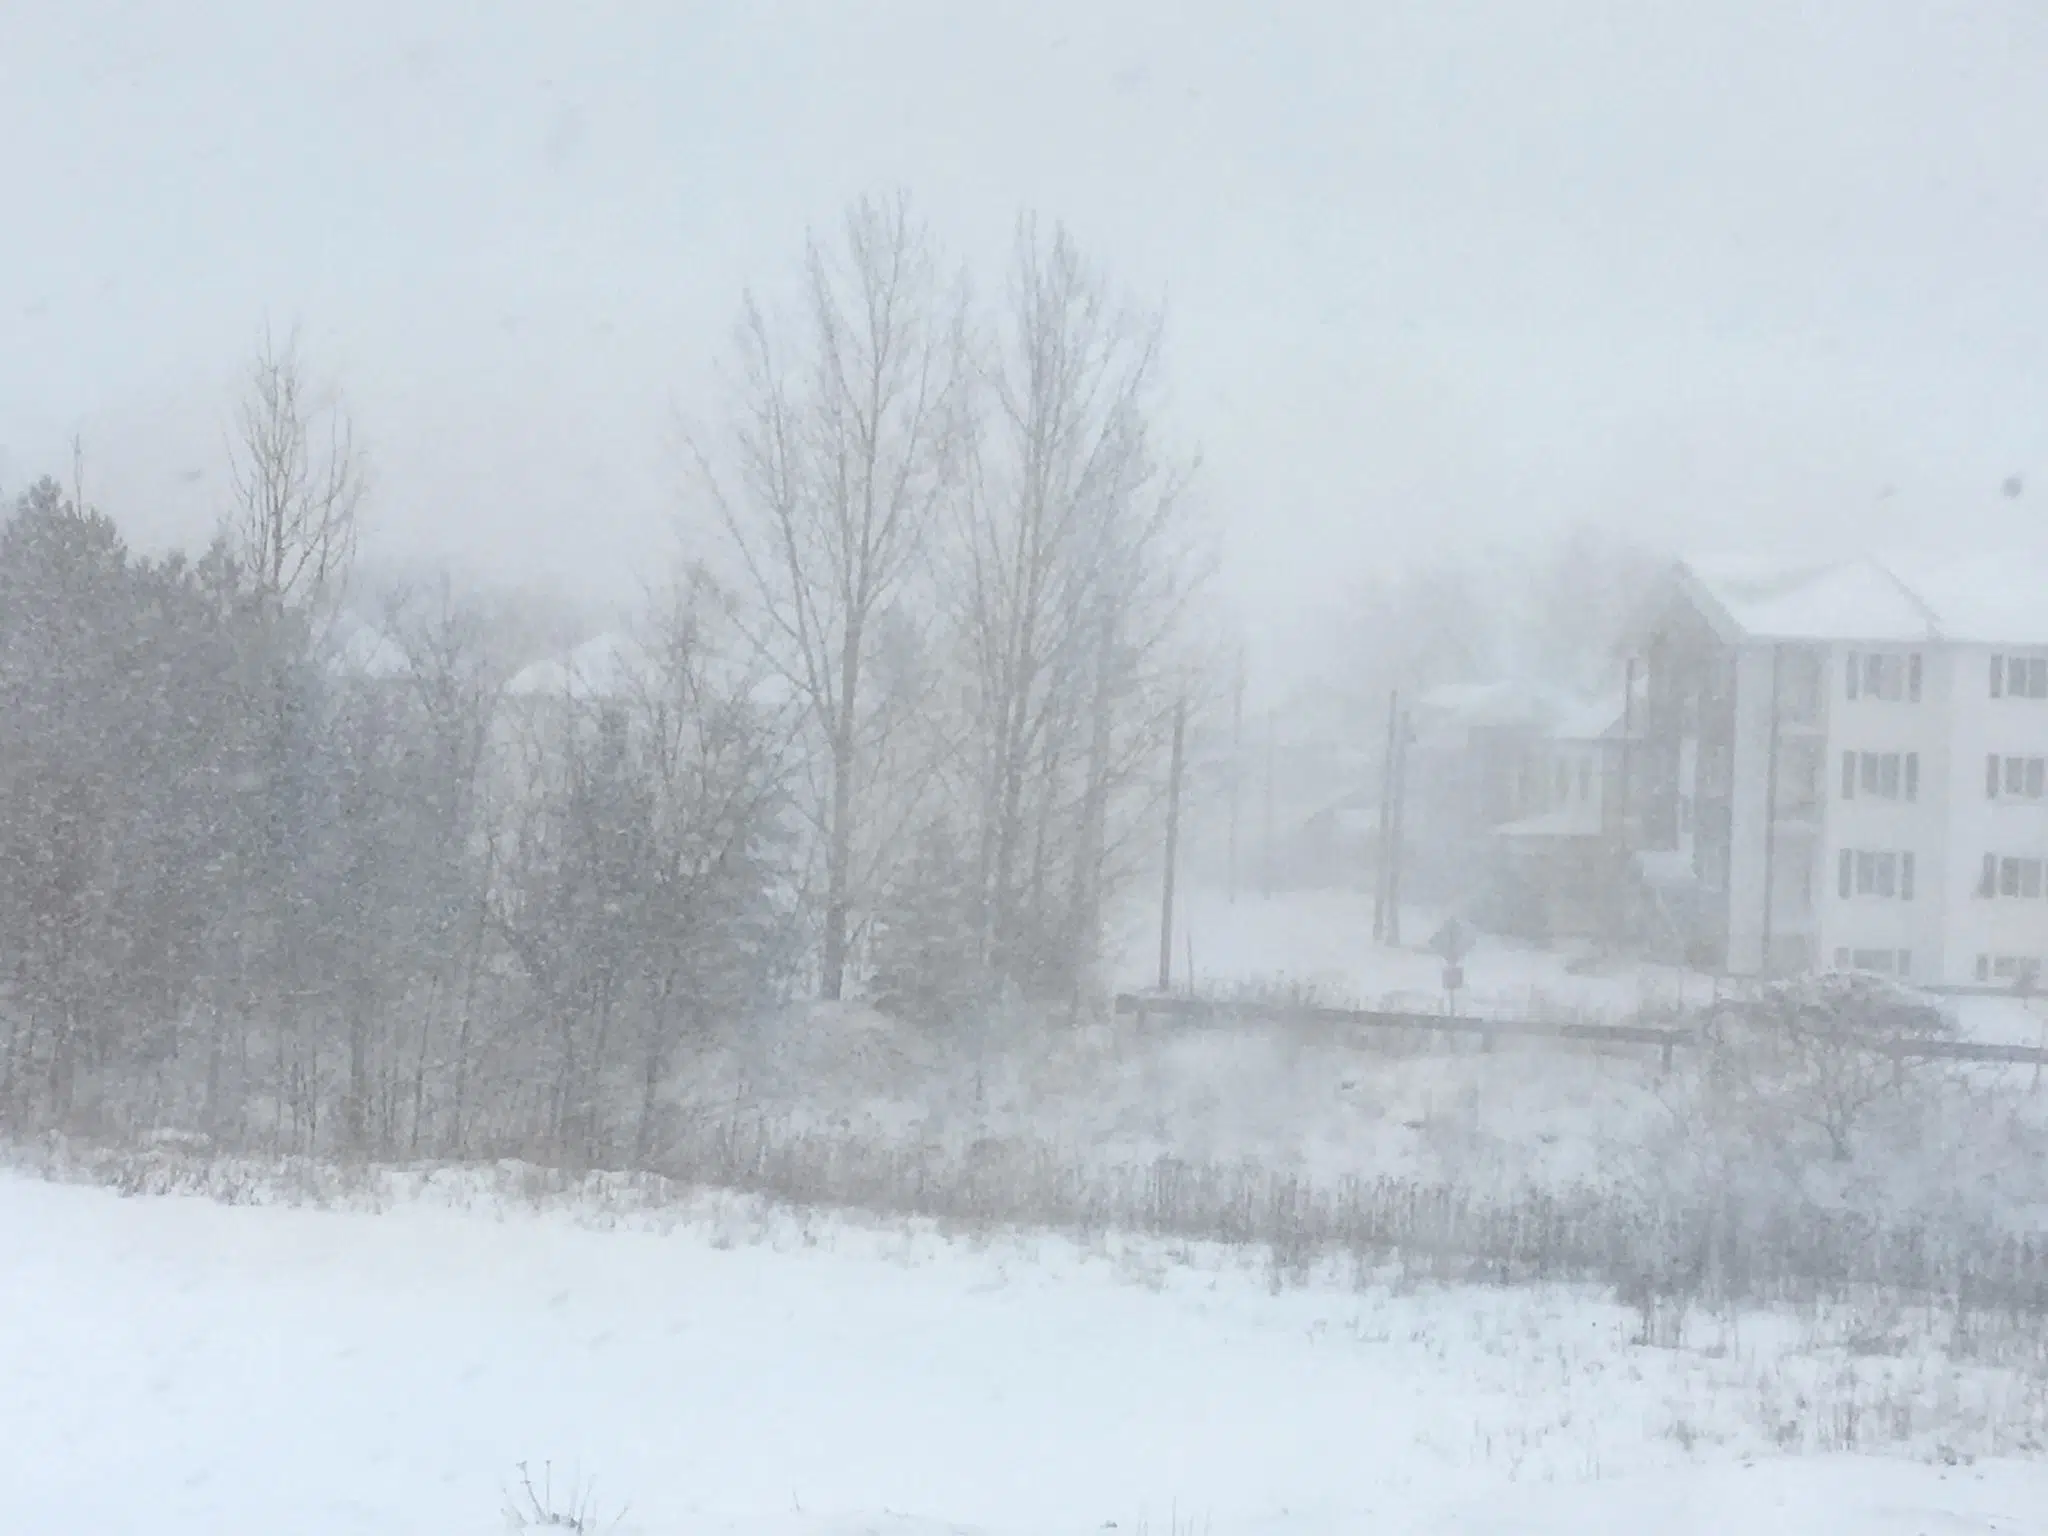 Snow Expected In Southeastern New Brunswick Monday & Tuesday